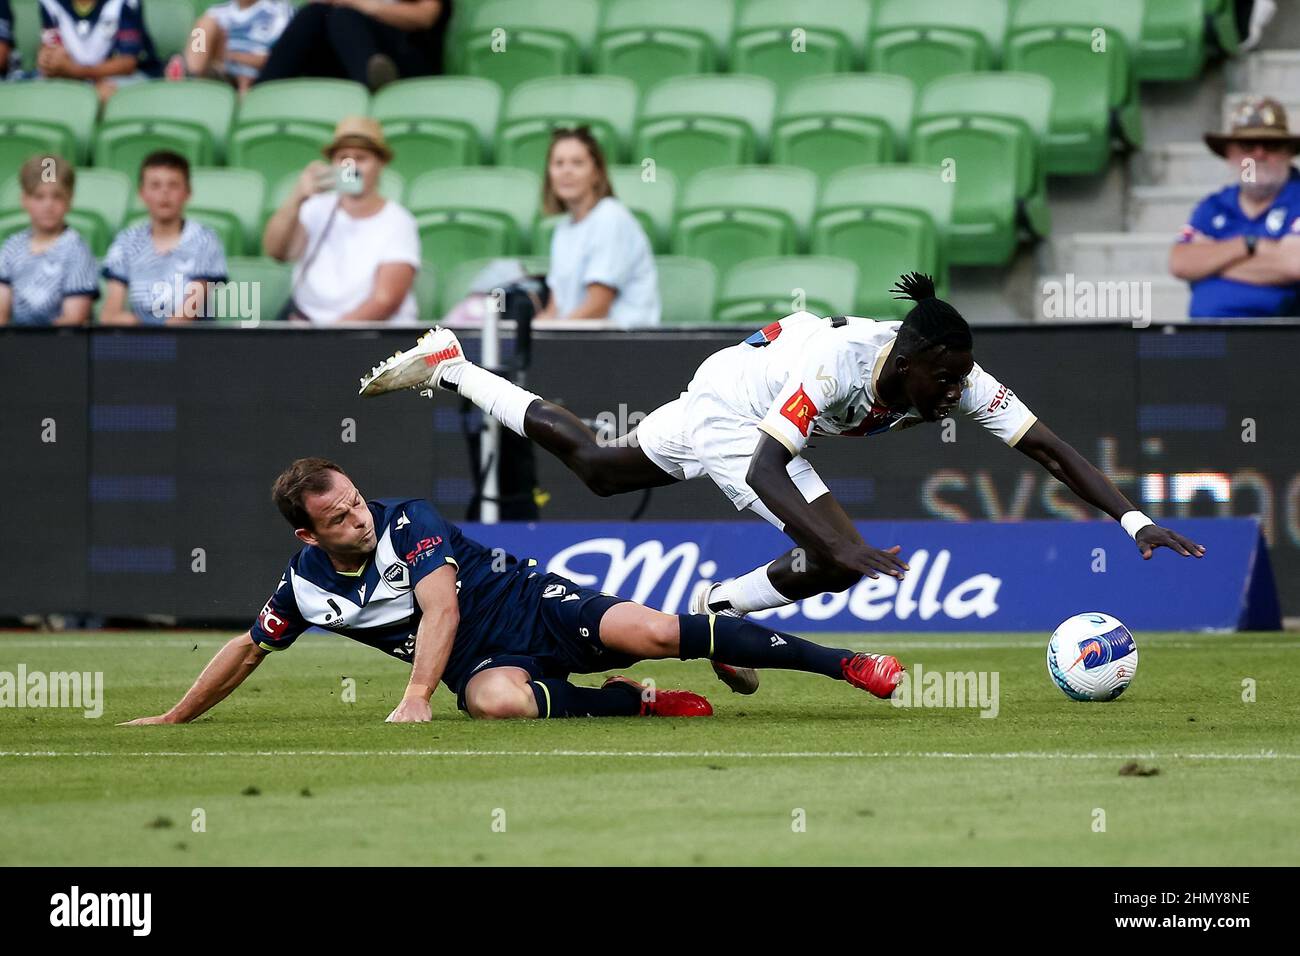 Melbourne, Australia, 12 February, 2022. Valentino Yuel of Newcastle Jets and Leigh Broxham of Melbourne Victory collide during the A-League soccer match between Melbourne Victory and Newcastle Jets at AAMI Park on February 12, 2022 in Melbourne, Australia. Credit: Dave Hewison/Speed Media/Alamy Live News Stock Photo